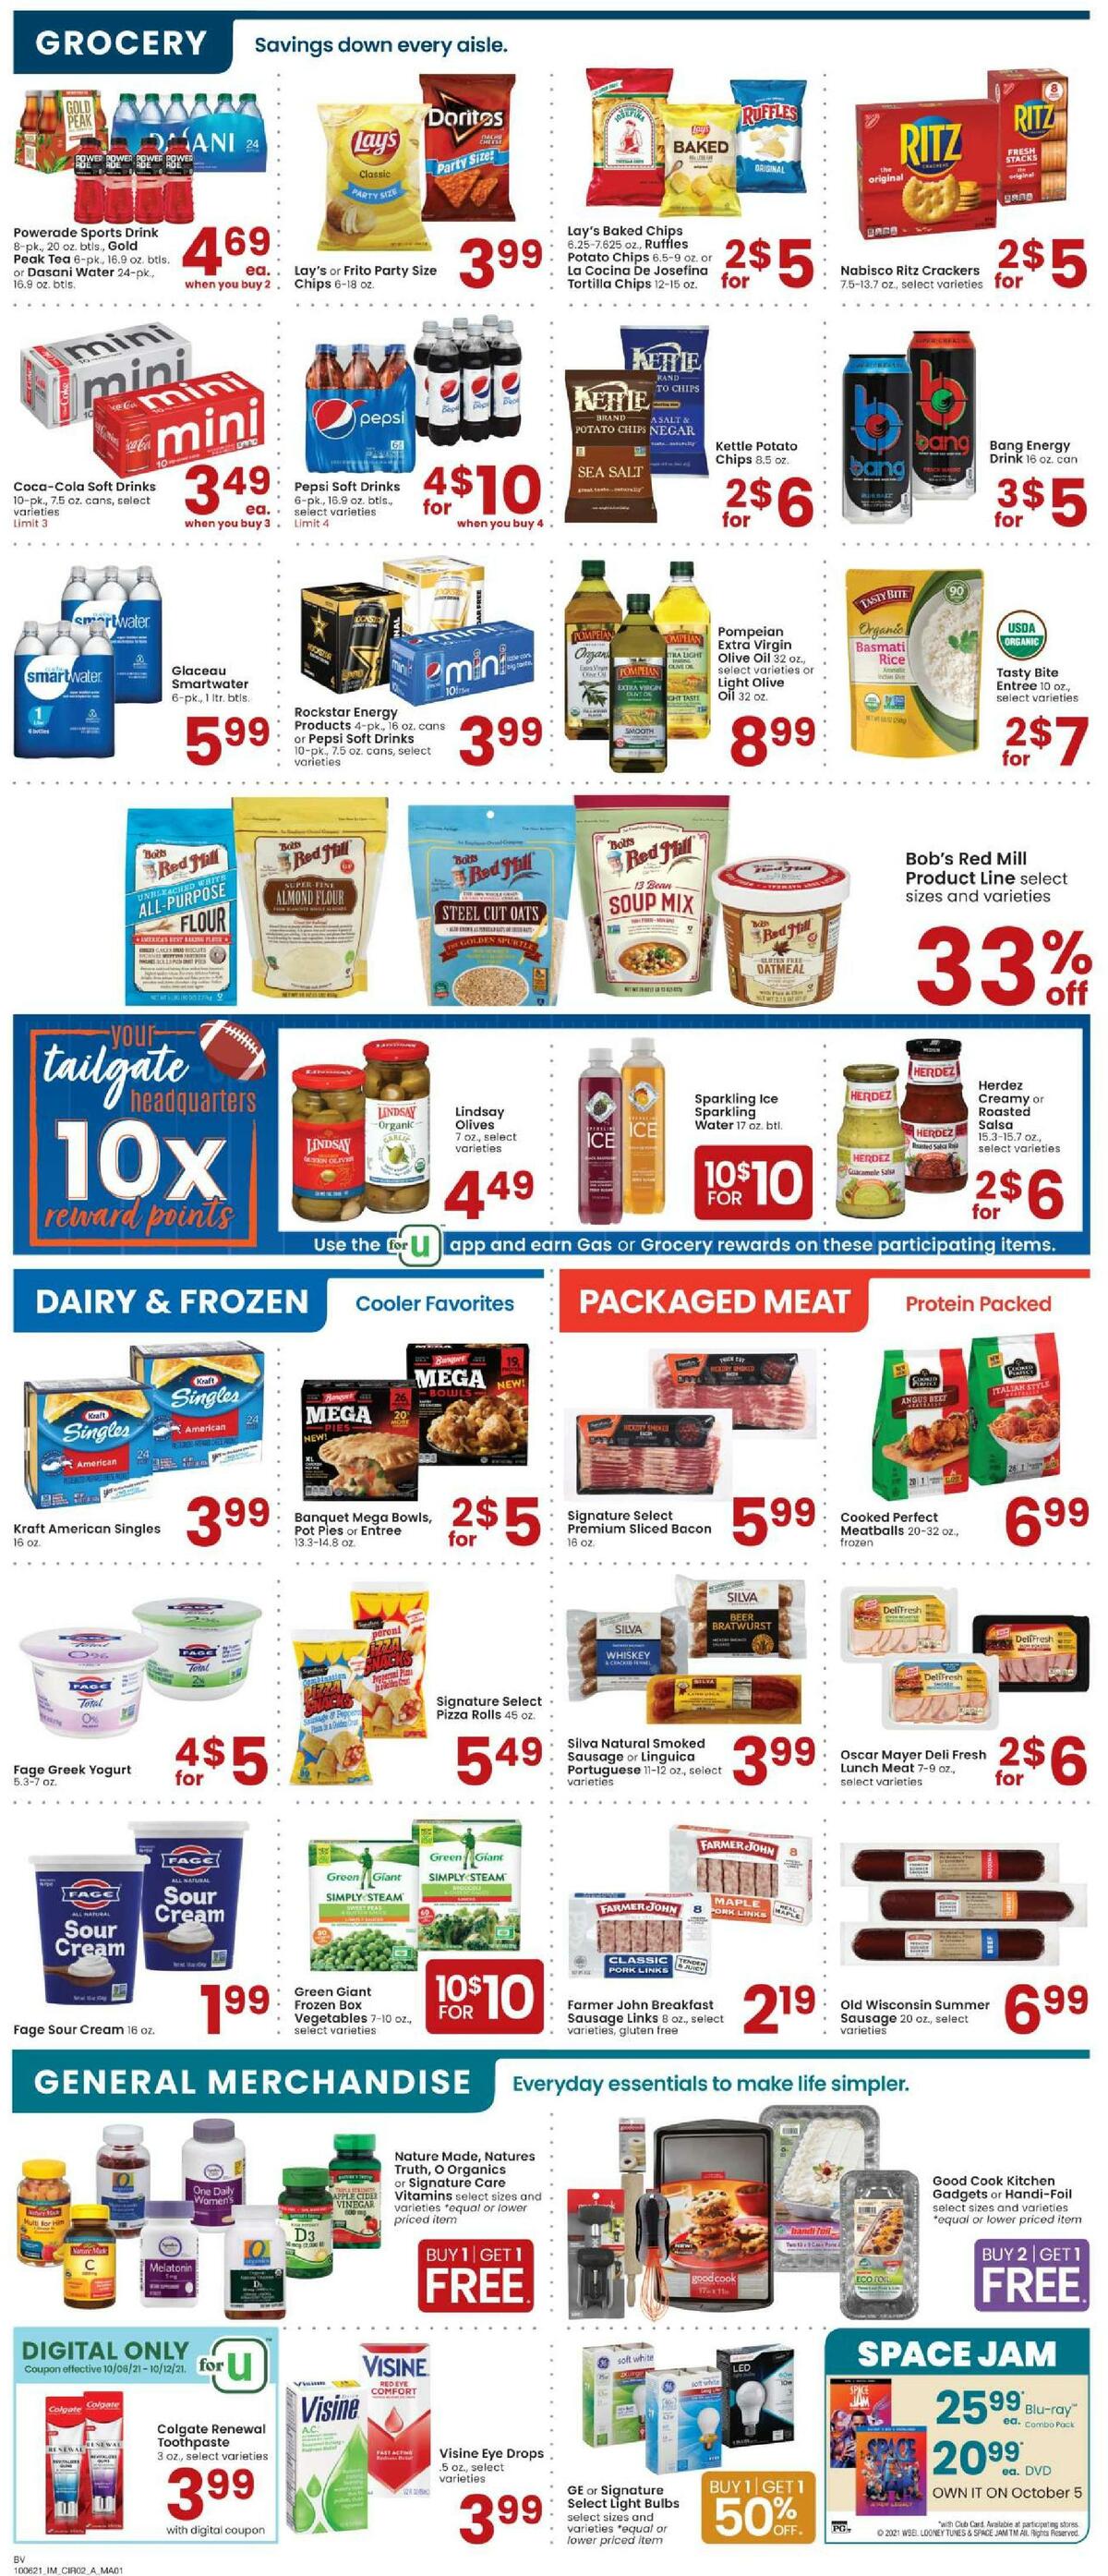 Albertsons Weekly Ad from October 6